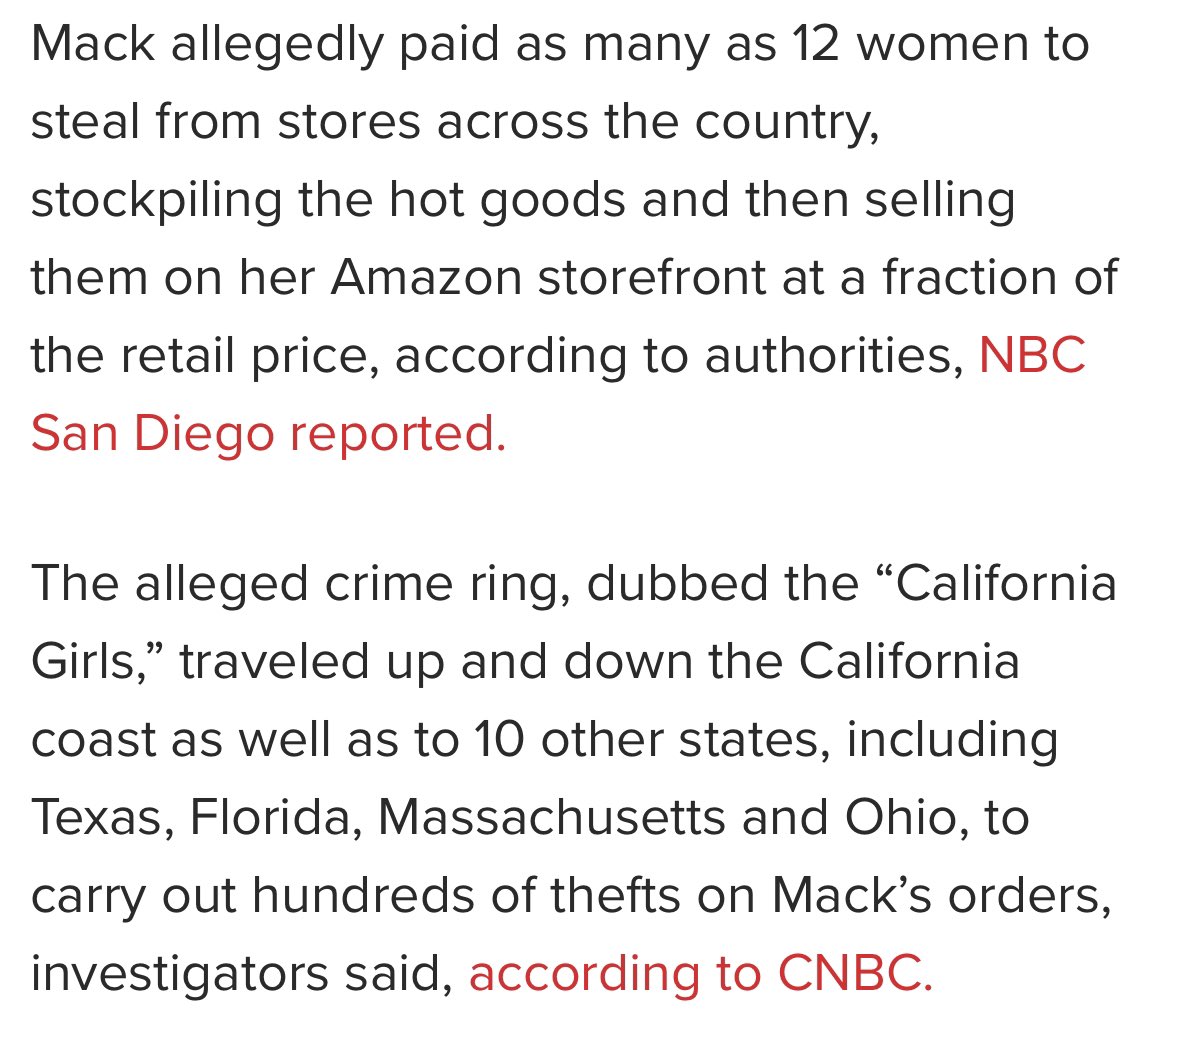 Waitaminute. You’re telling me that the increases in retail theft are not necessarily due to liberal pro-crime politicians and doom loops but instead the ability to safely and efficiently fence stolen goods through Amazon????